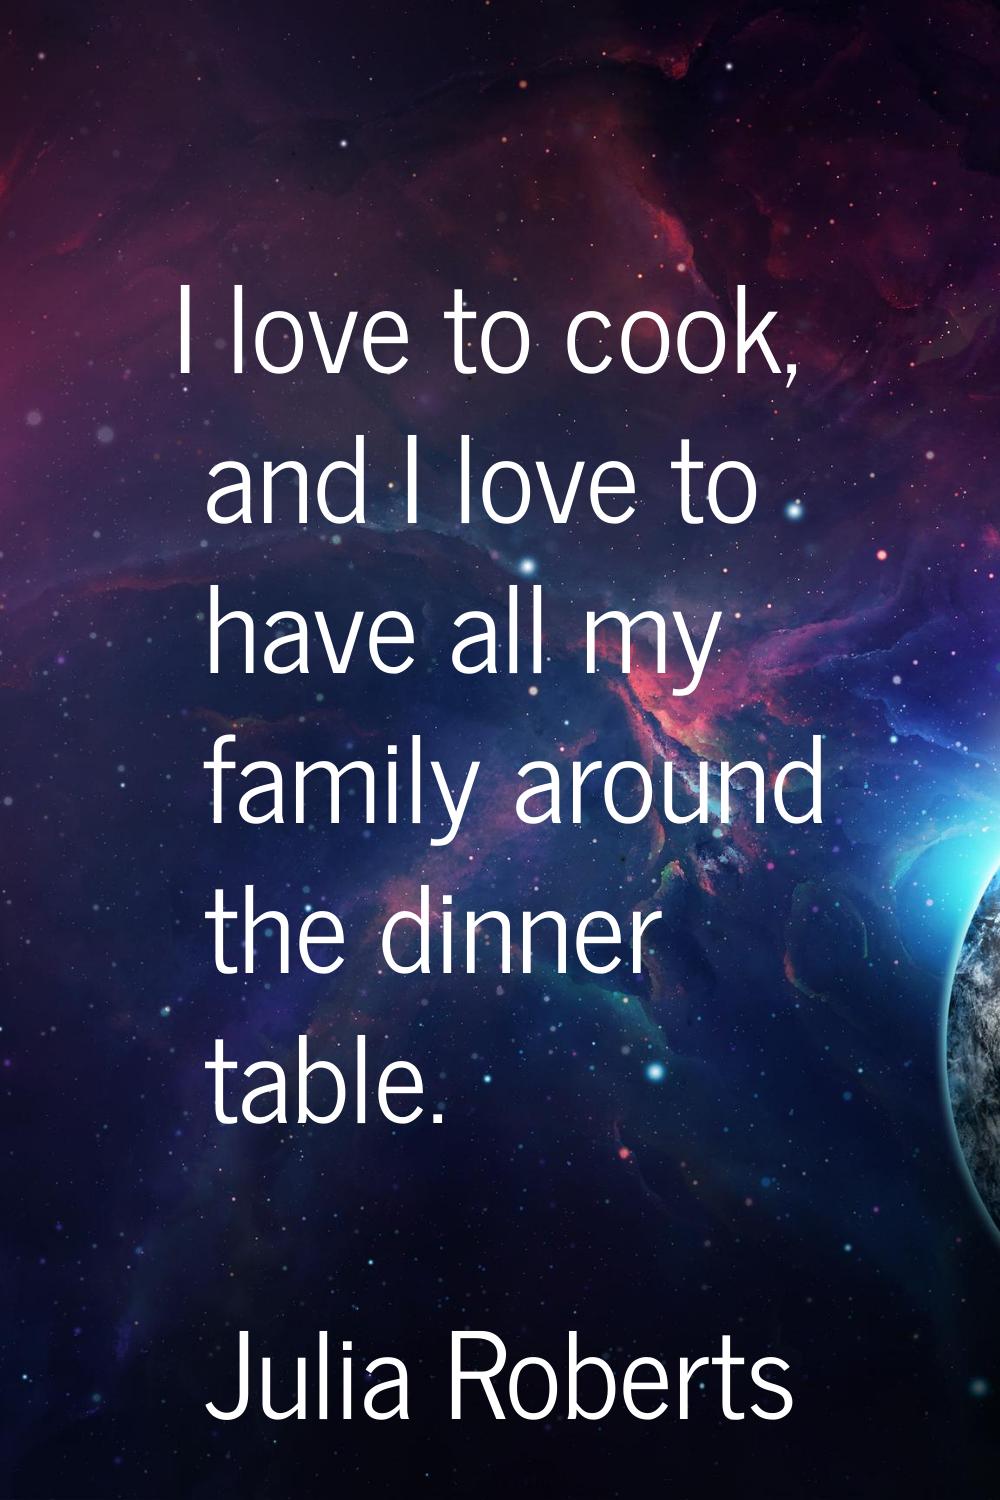 I love to cook, and I love to have all my family around the dinner table.